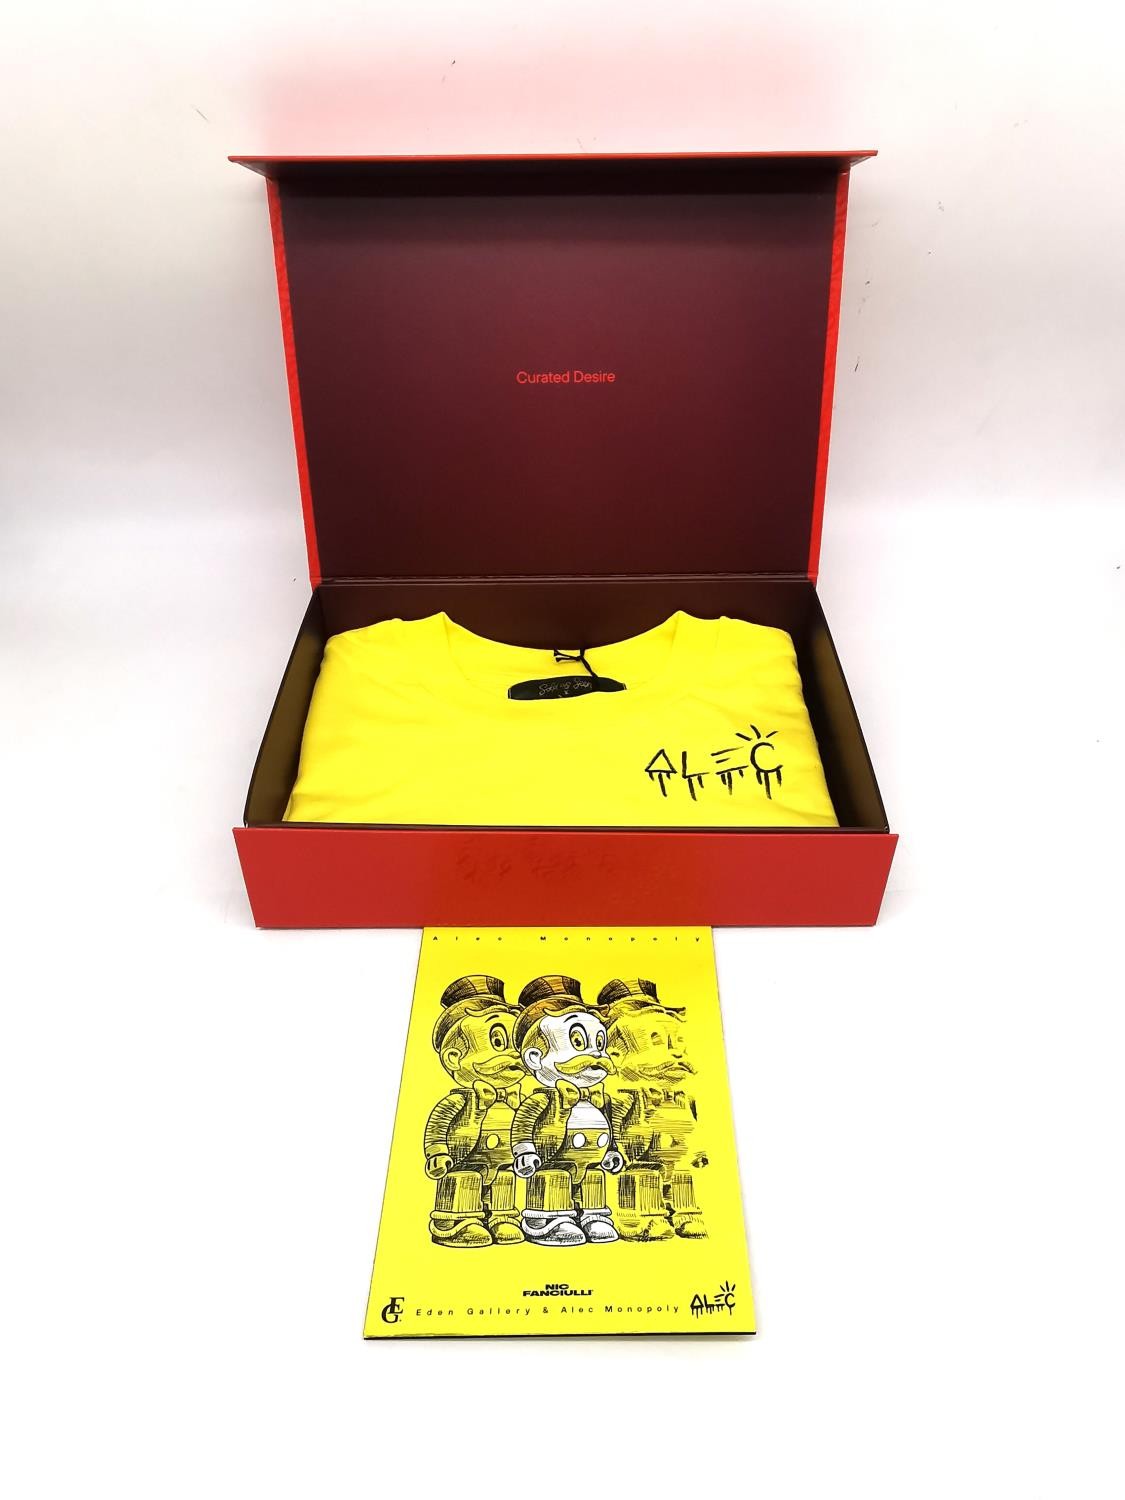 'Sold as Seen' signed T-shirt by the artist 'Alec Monopoly' size XS, measures 105cm from where the